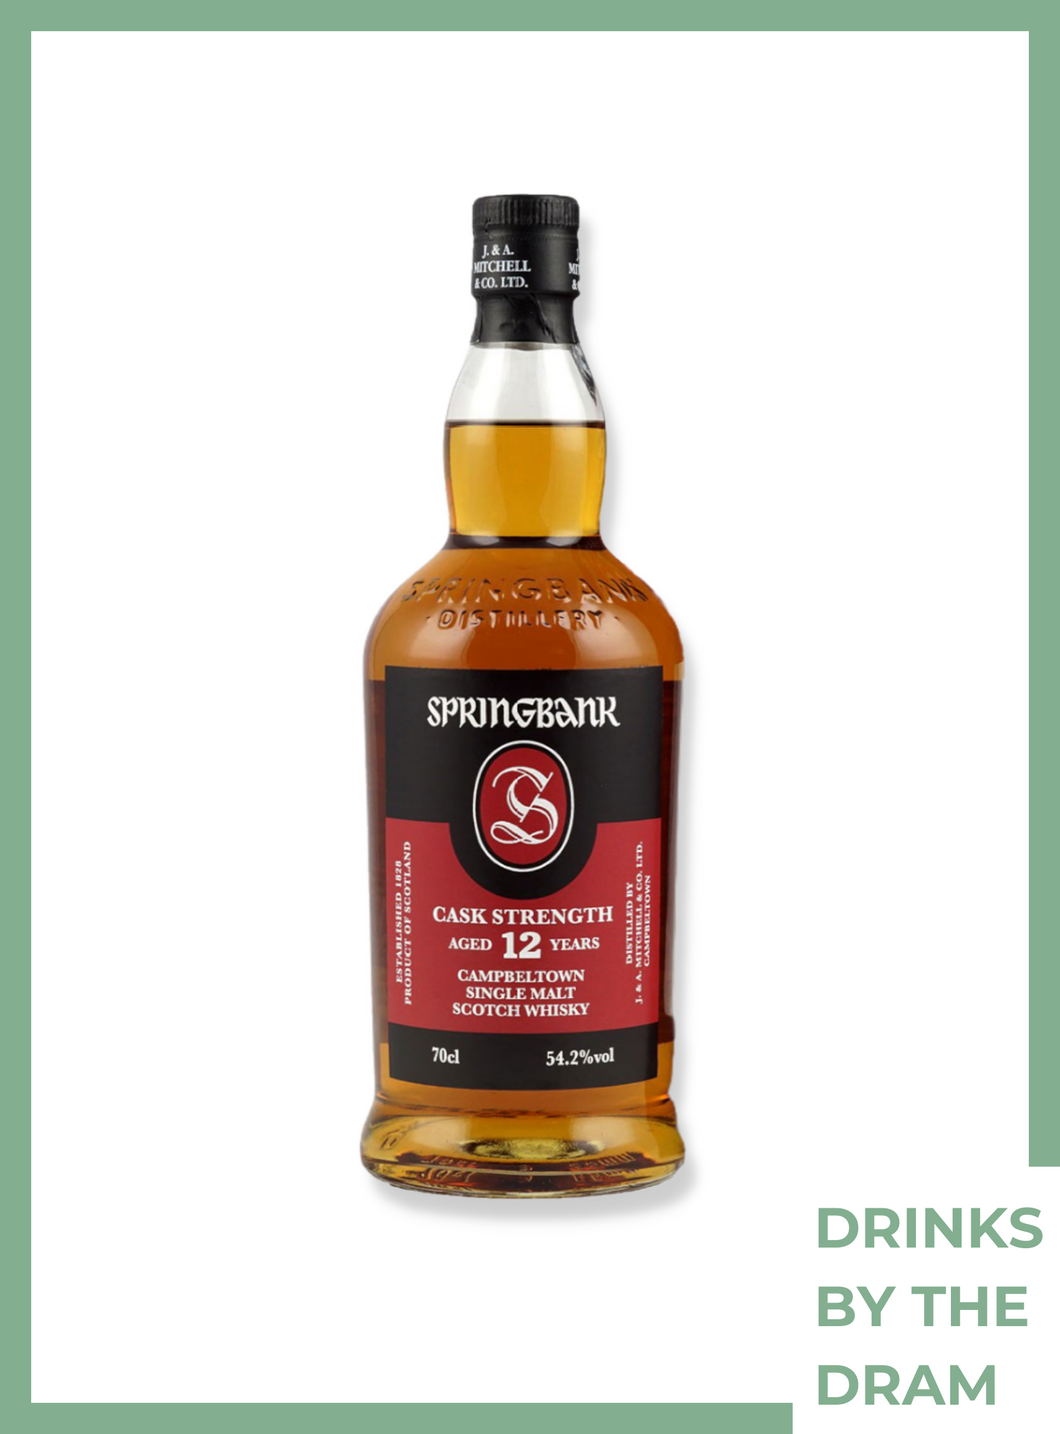 By the Dram (30 ml): Springbank 12 Year Old Cask Strength 2021 / 55.4%